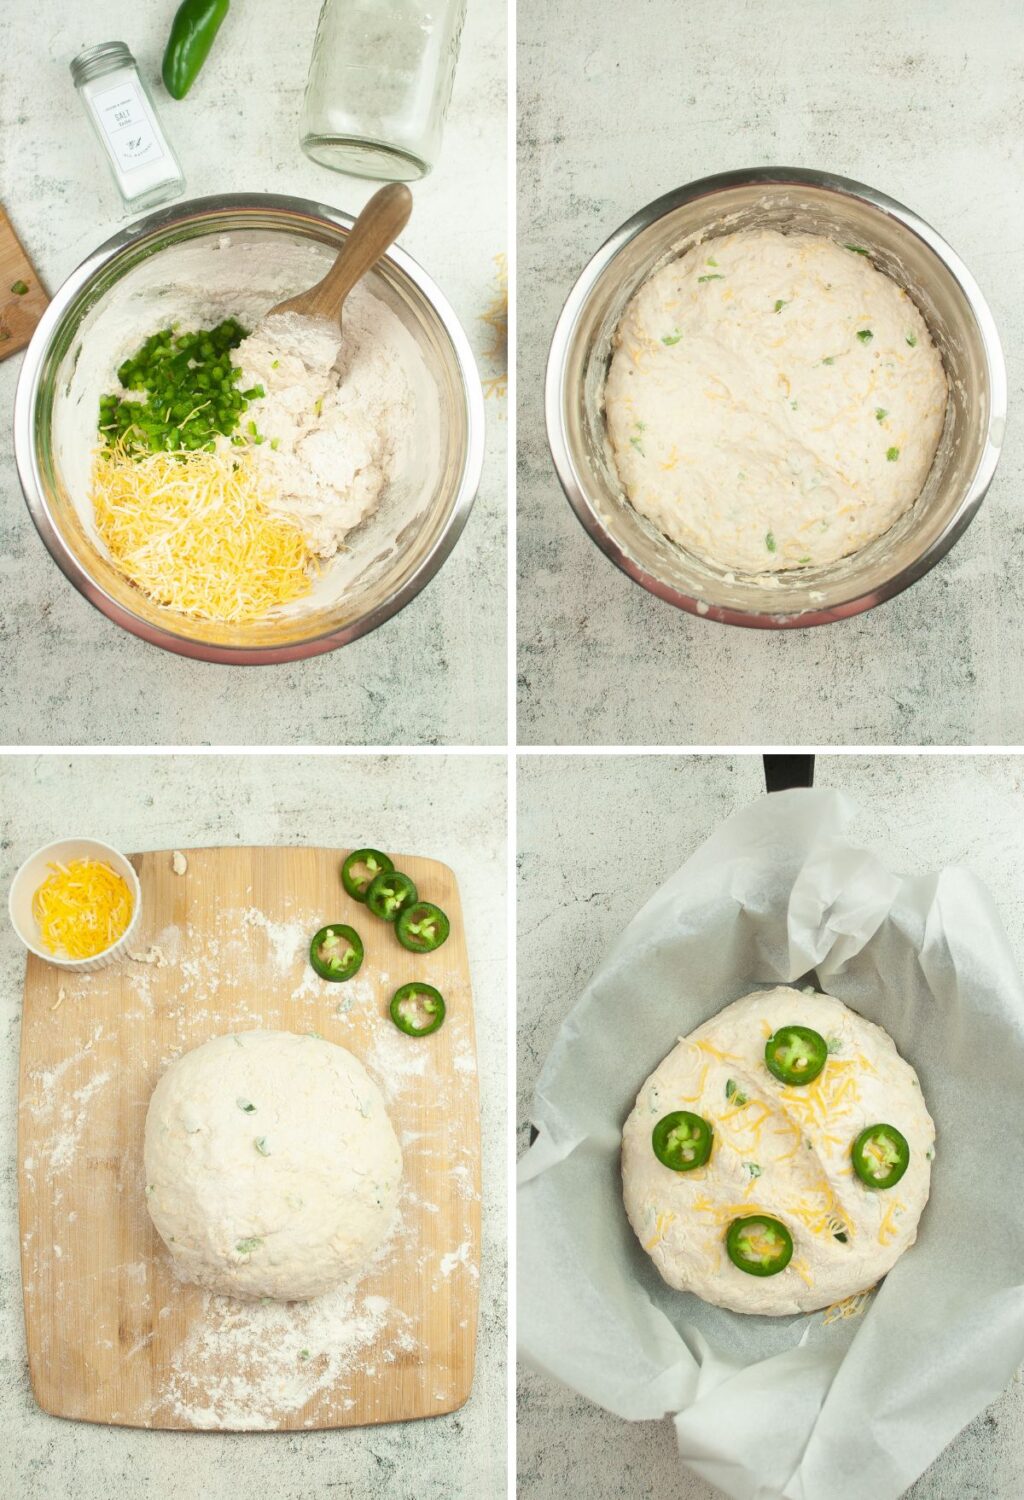 A series of photos showing how to make a pizza with jalapenos and cheese.